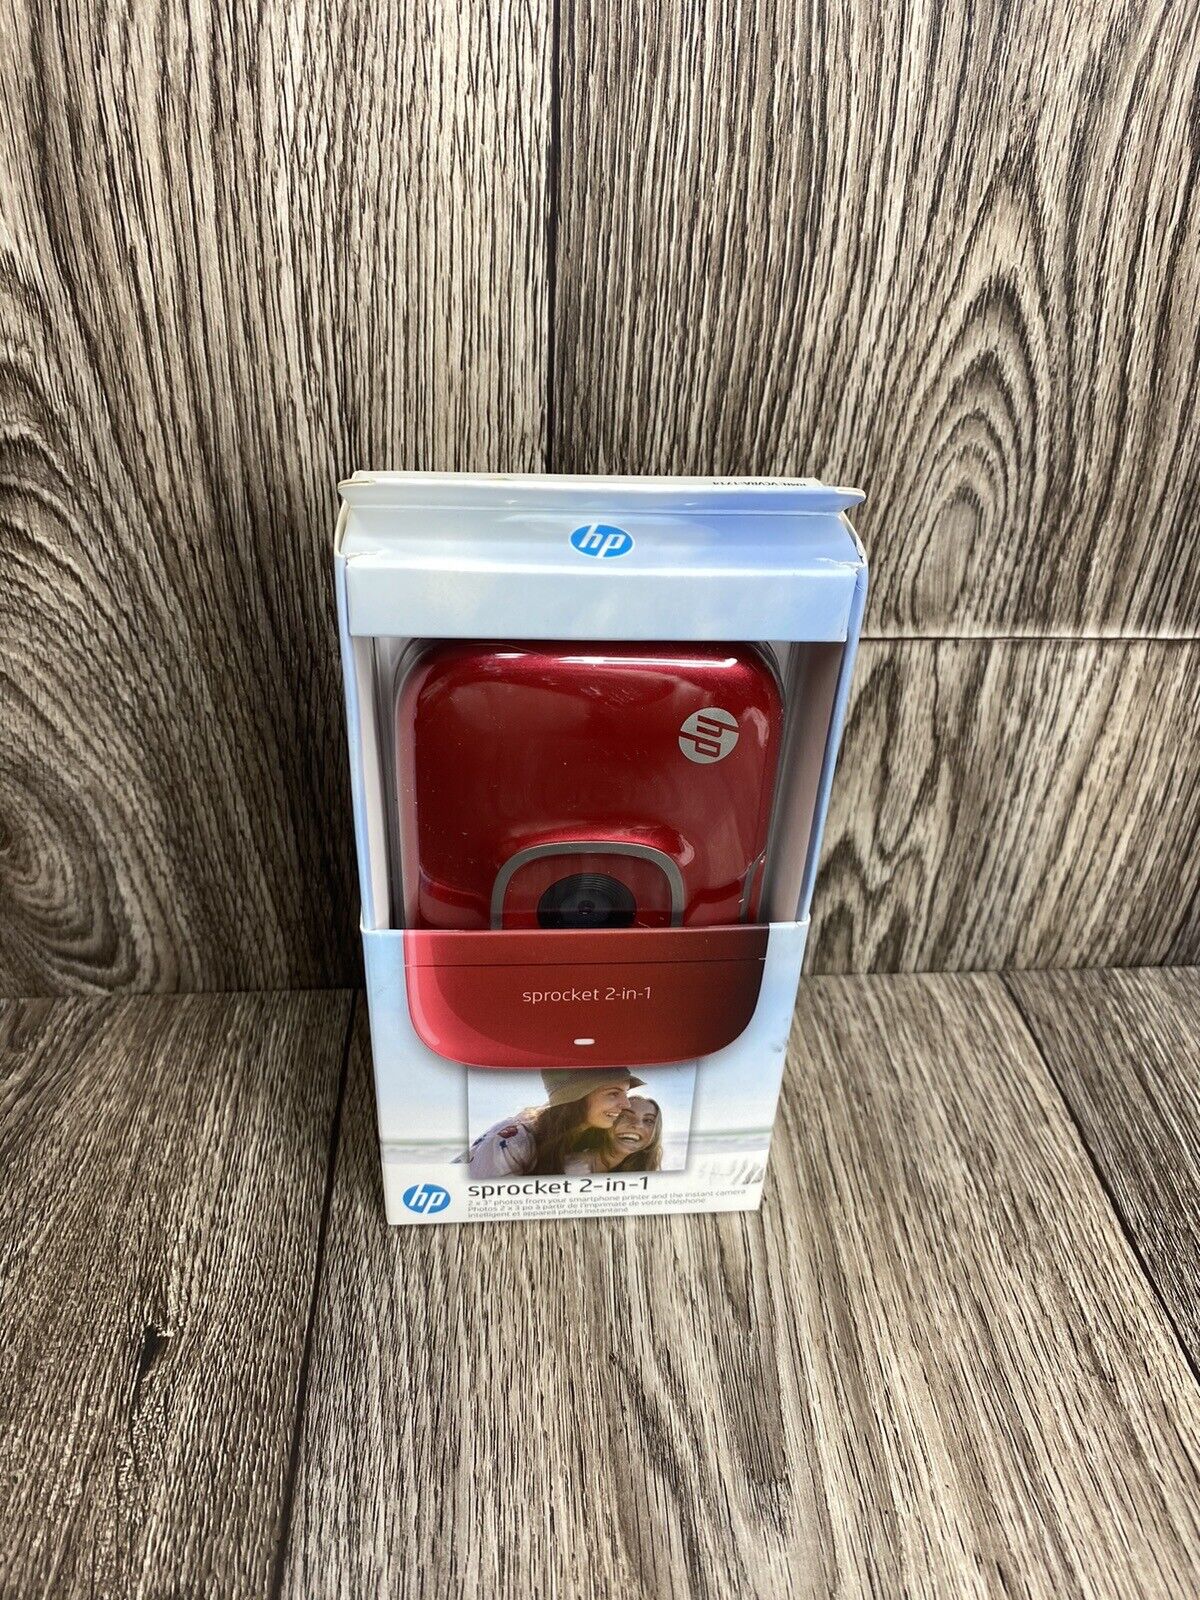 NEW HP - Sprocket 2-in-1 Photo Printer - Red 2FB98A #B1H